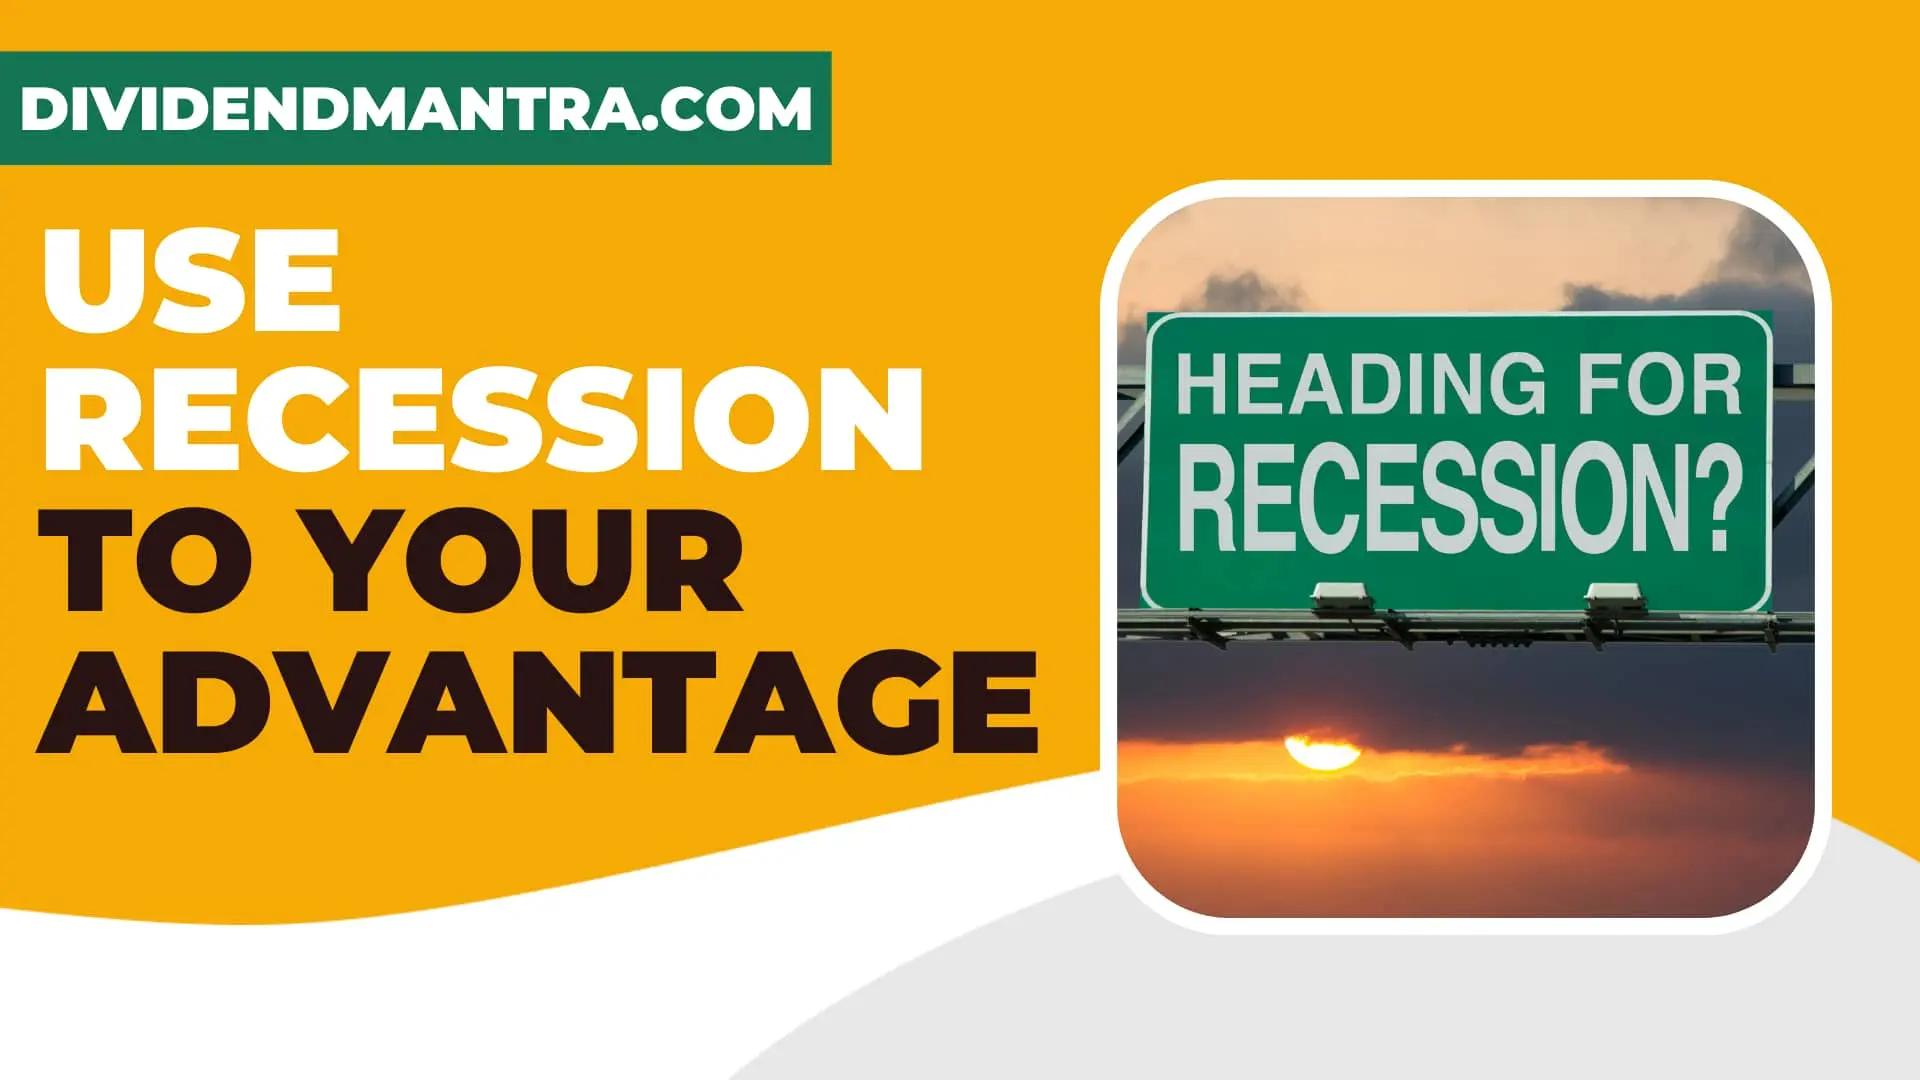 Use Recession to Your Advantage